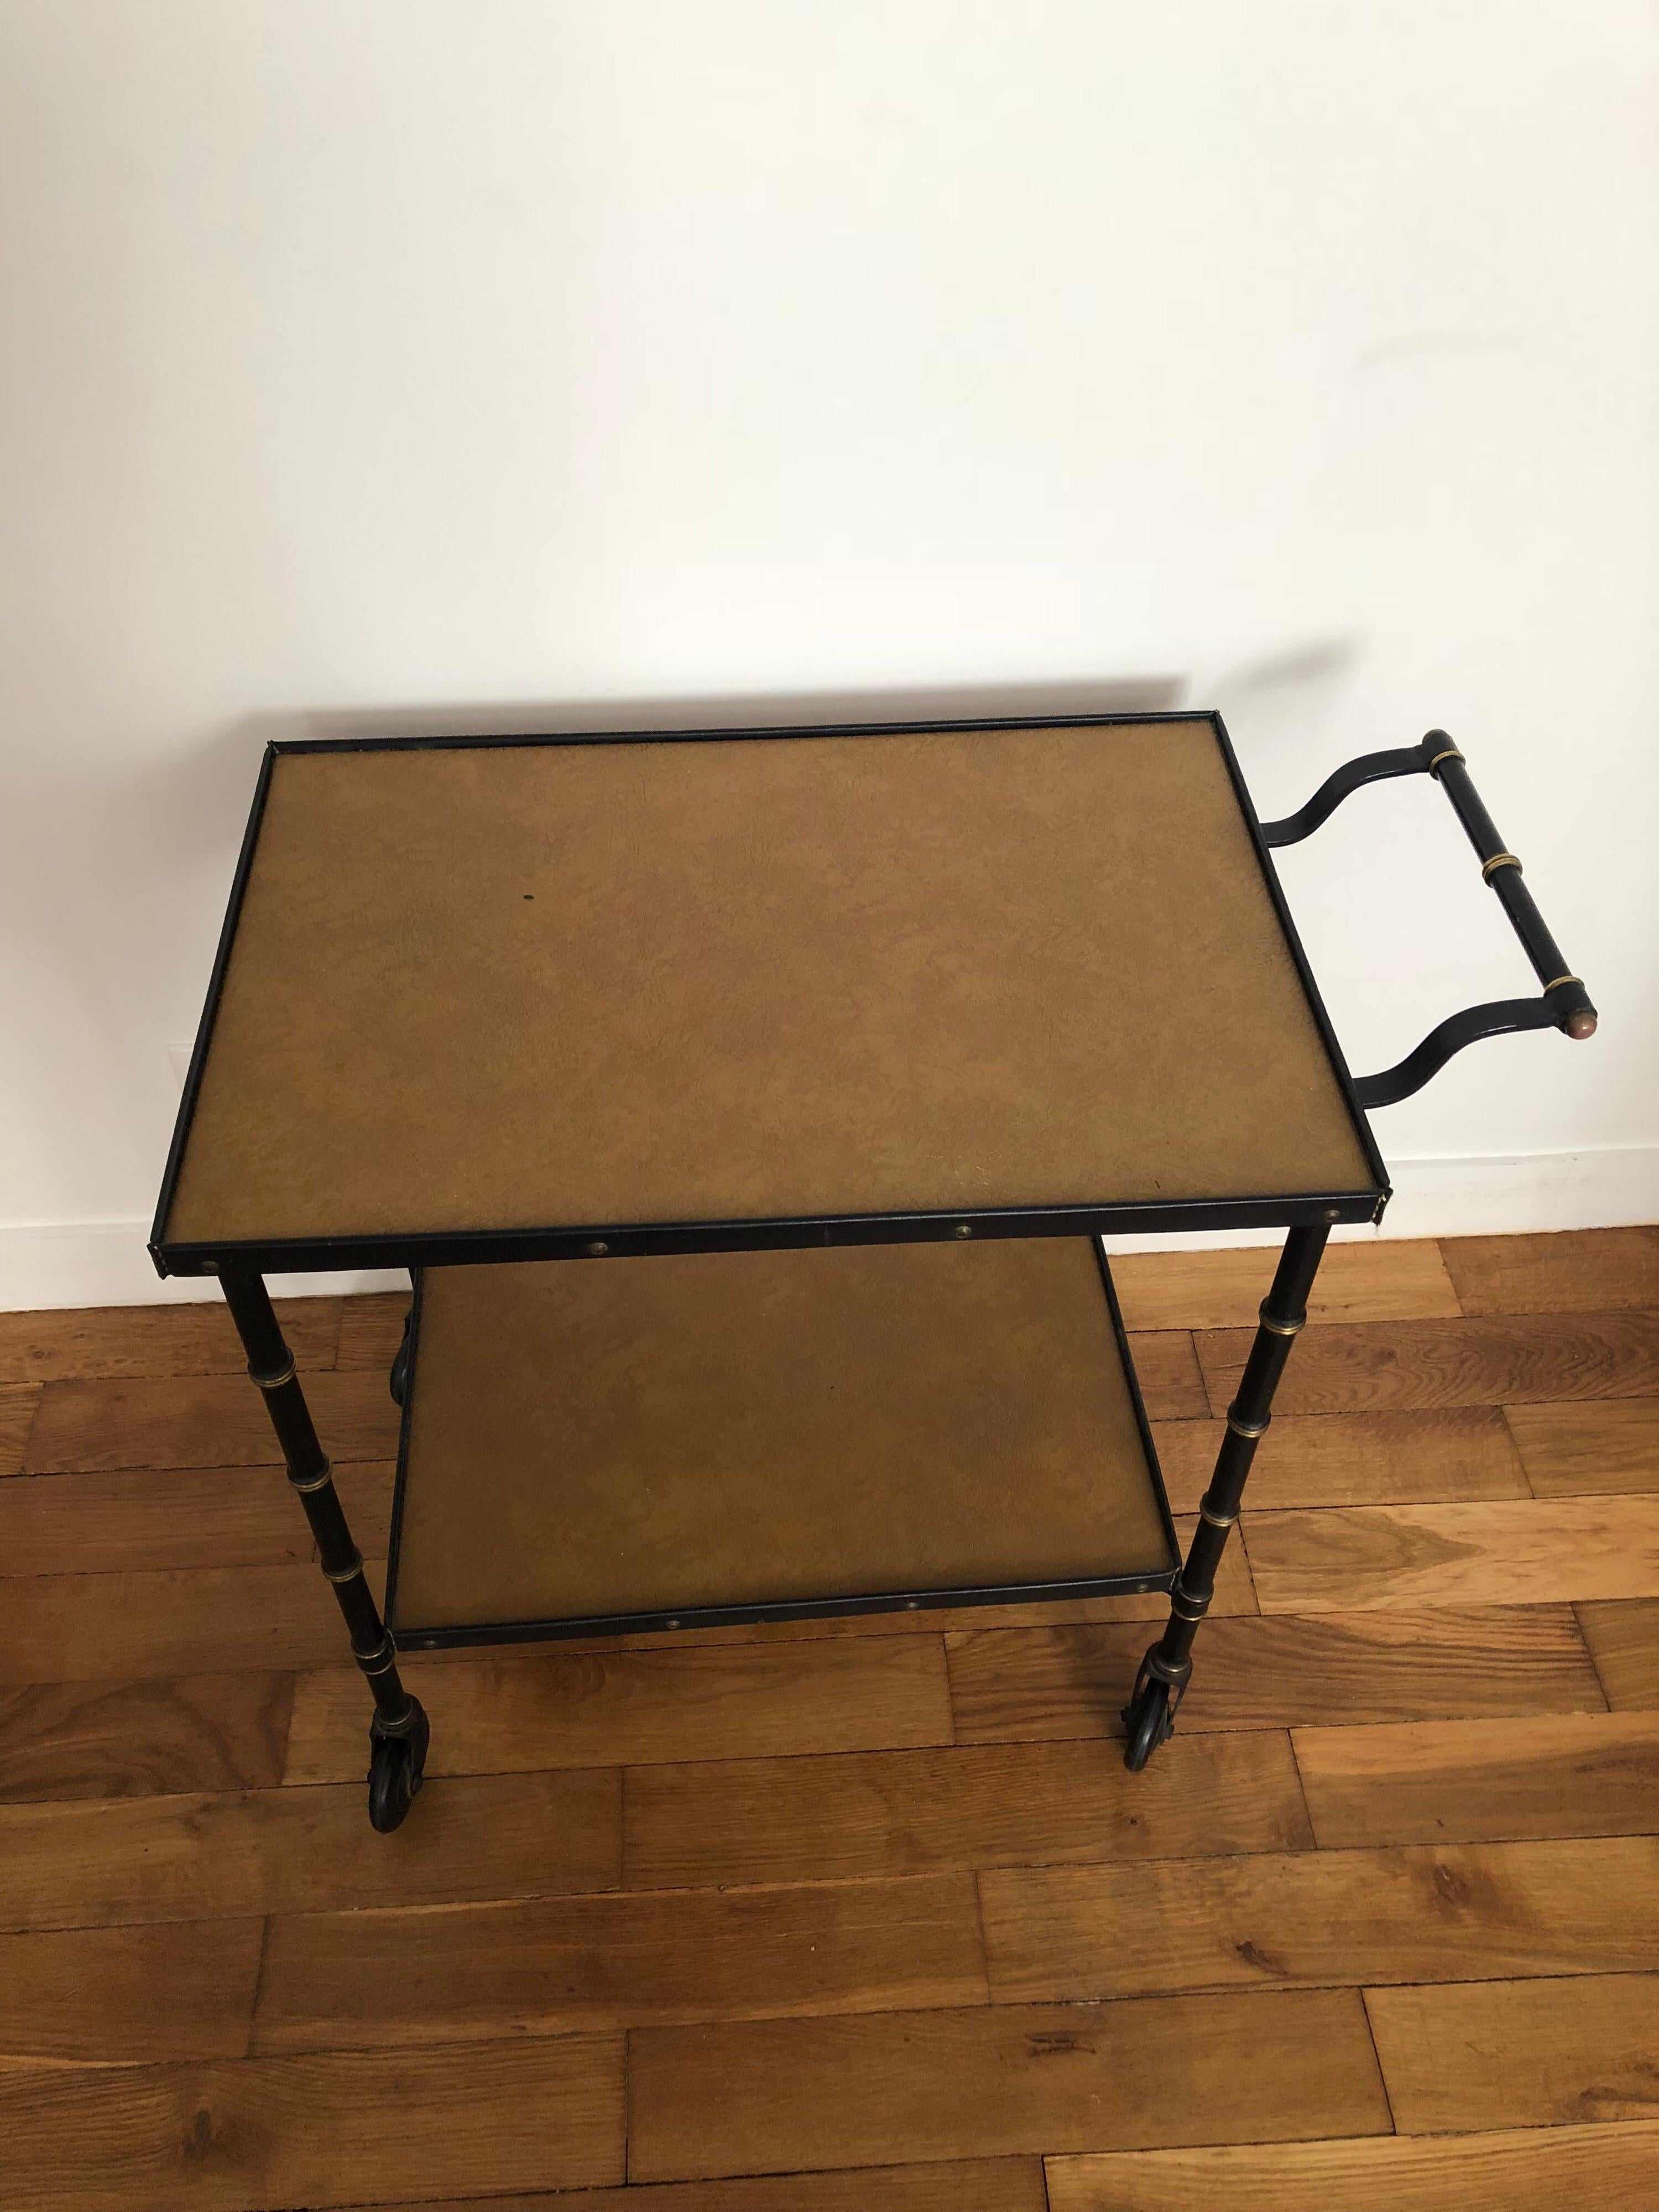 Jacques Adnet bar cart
The belt of the two trays are in black leather.
The two top trays are in light brown faux leather.
The structure is in black metal decorated with brass rings,
circa 1950.
Very good original condition.
Measures:
Long 73